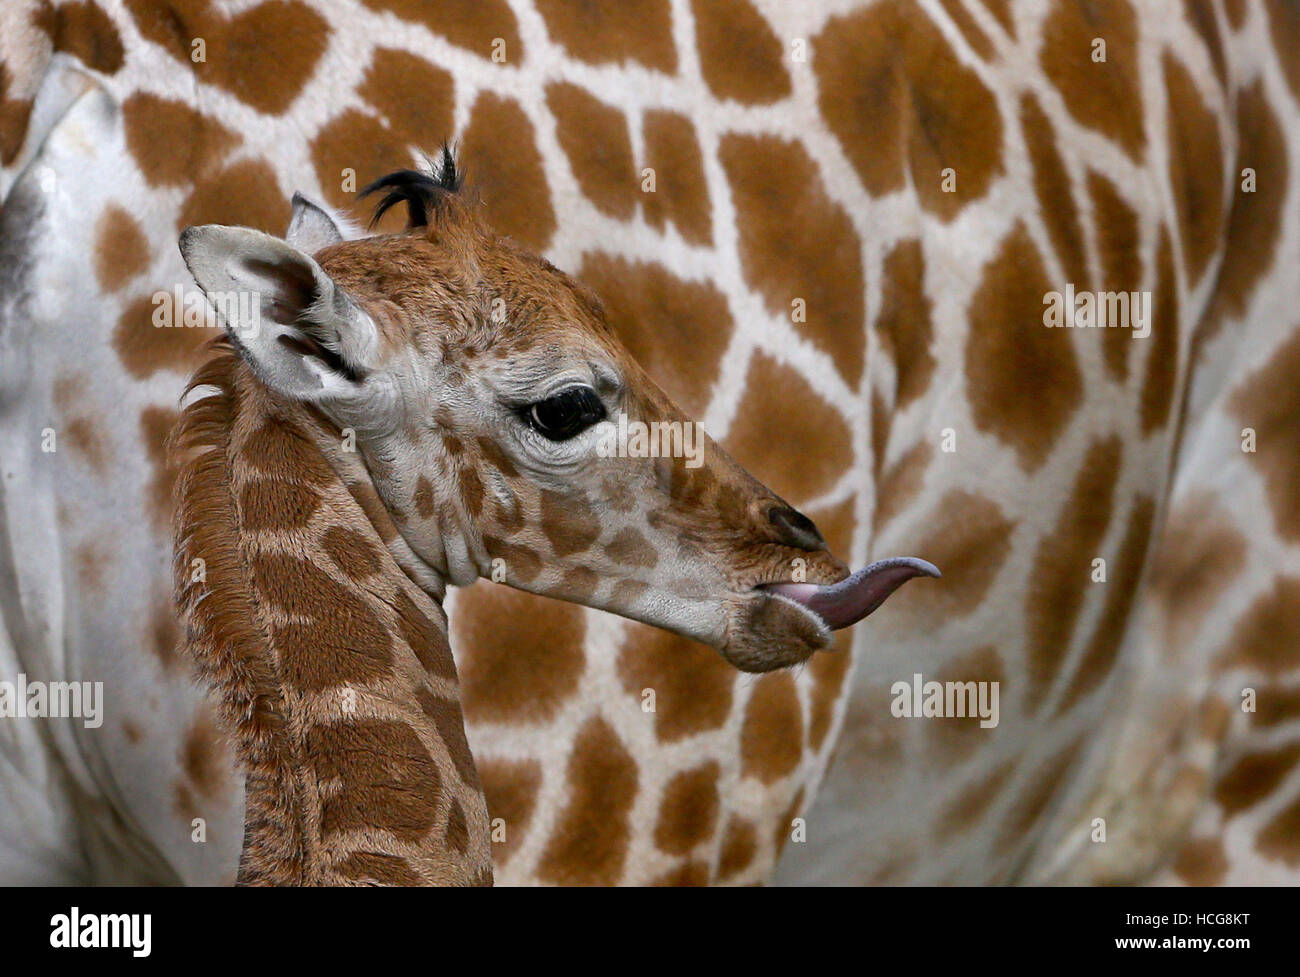 A one week old unnamed male Giraffe calf stands next to his mother Lehana at Port Lympne Wild animal Park near Ashford in Kent. Stock Photo